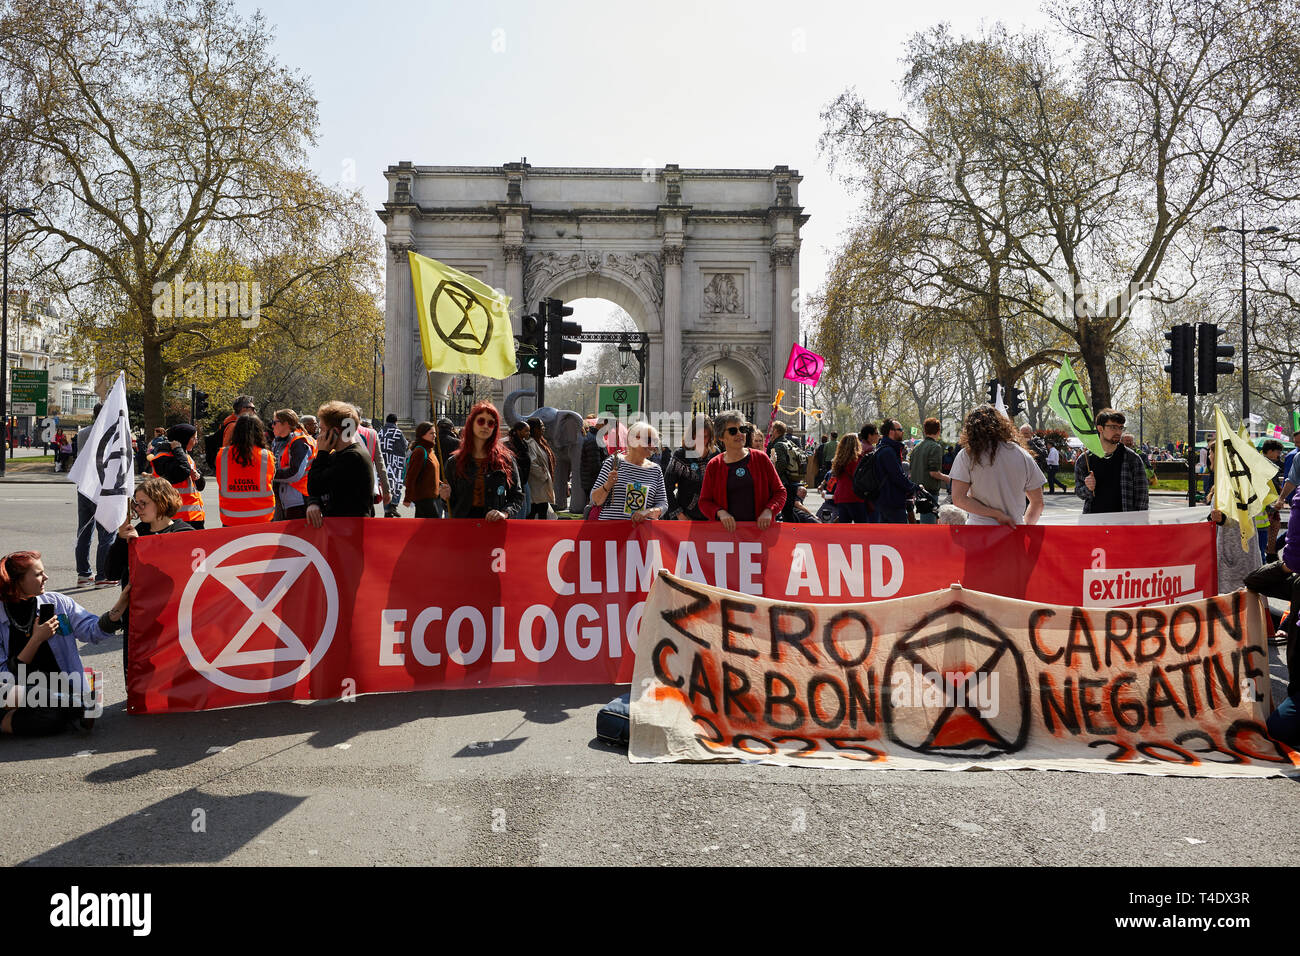 London, UK. - April 15, 2019: Members of Extinction Rebellion block roads leading to Marble Arch to promote awareness of climate change. Stock Photo